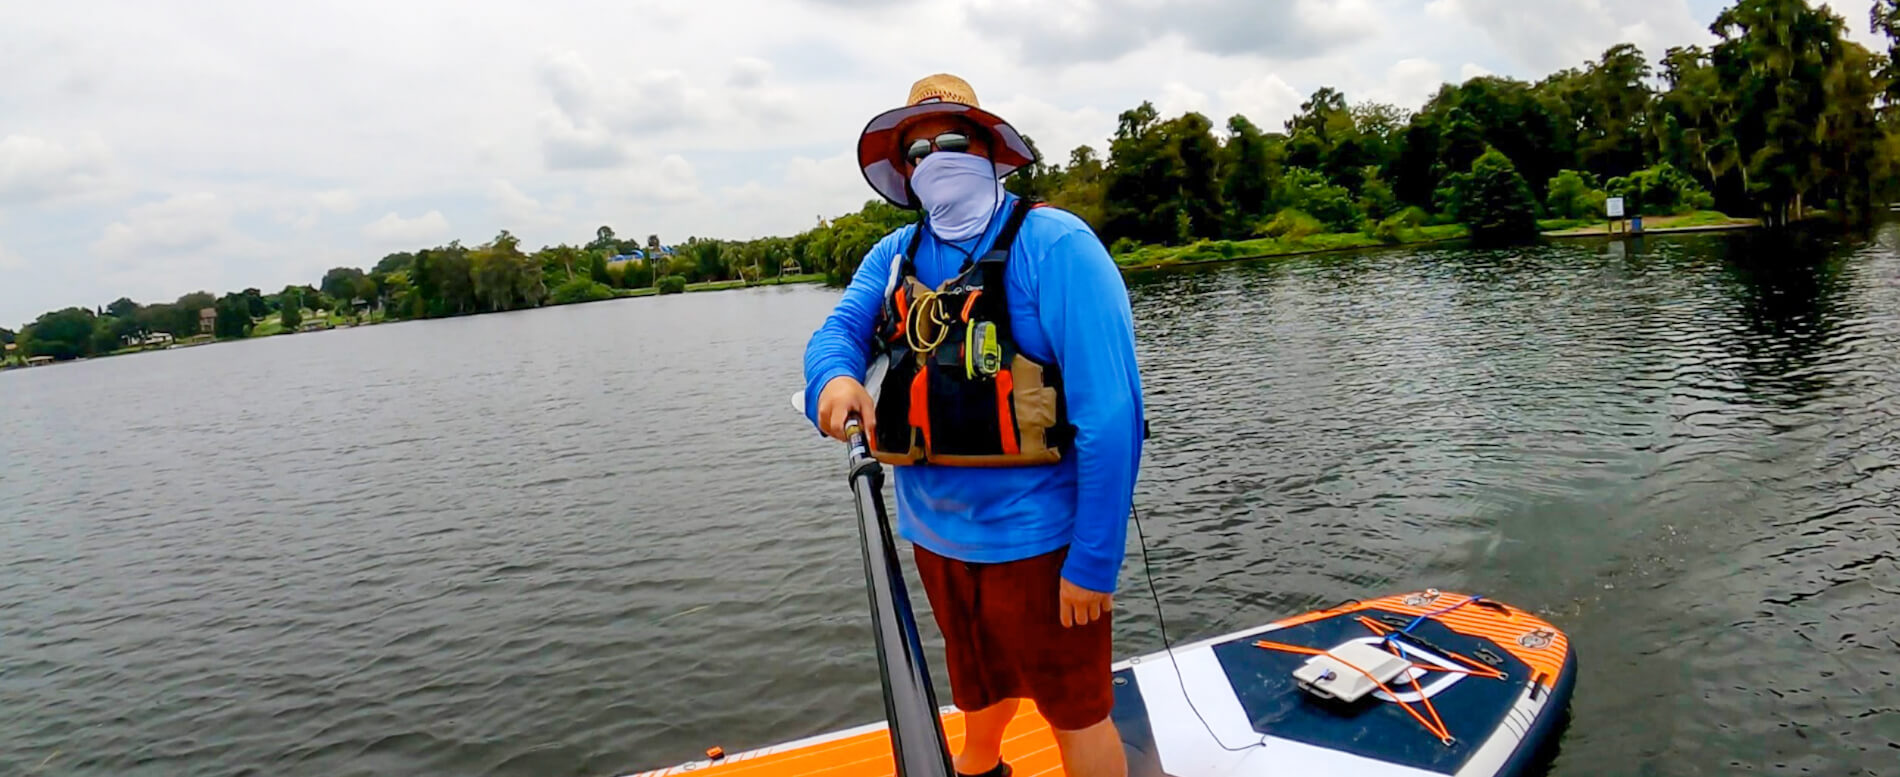 A Review of the Onyx MoveVent Dynamic Life Vest | GILI Sports